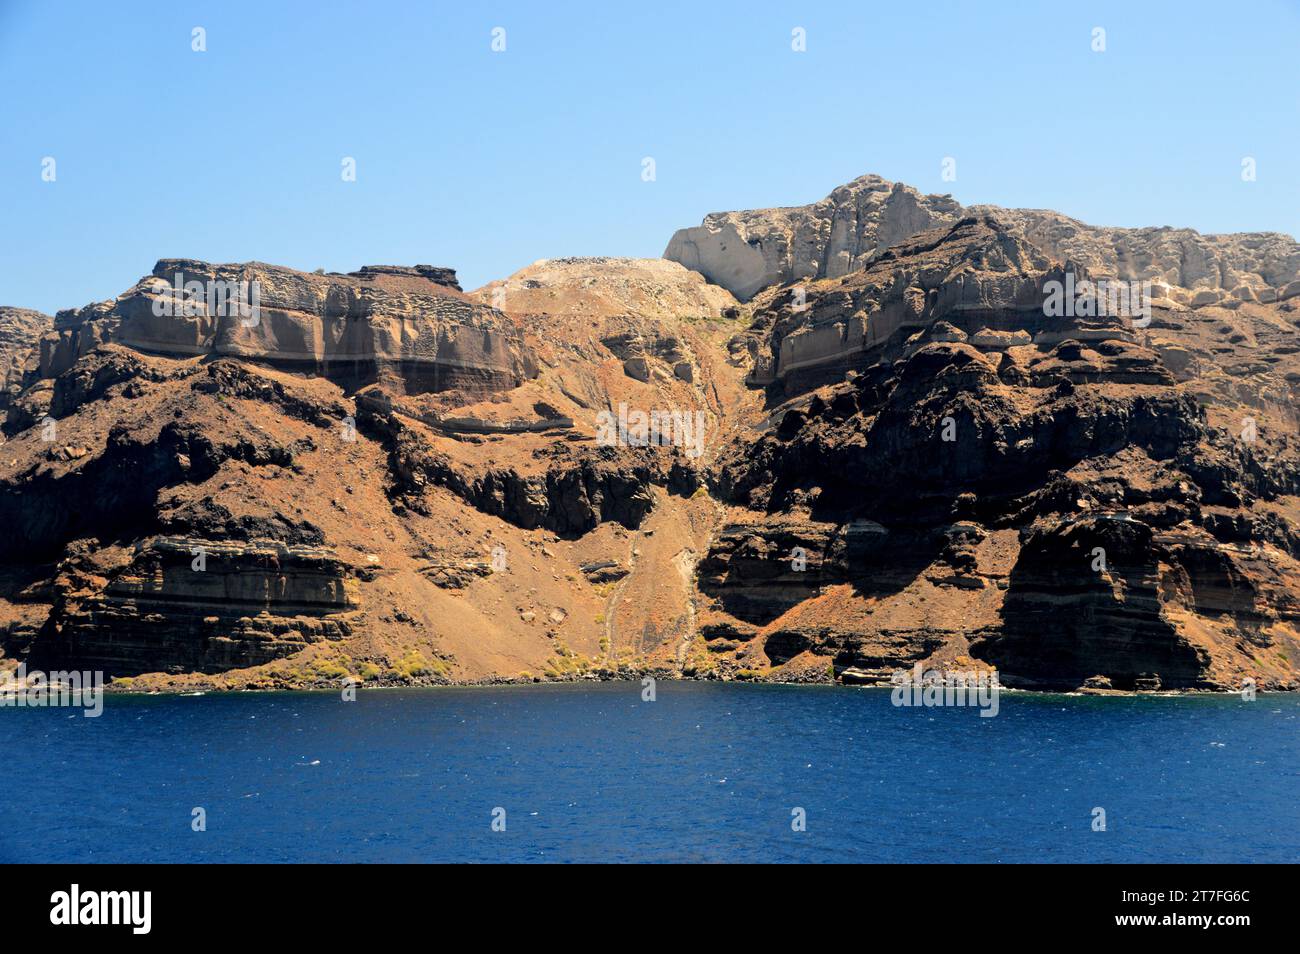 The Cliff Walls on the Rim of the Caldera (Crater) on the Volcanic Island of Santorini part of the Cyclades Islands in the Aegean Sea, Greece, EU. Stock Photo